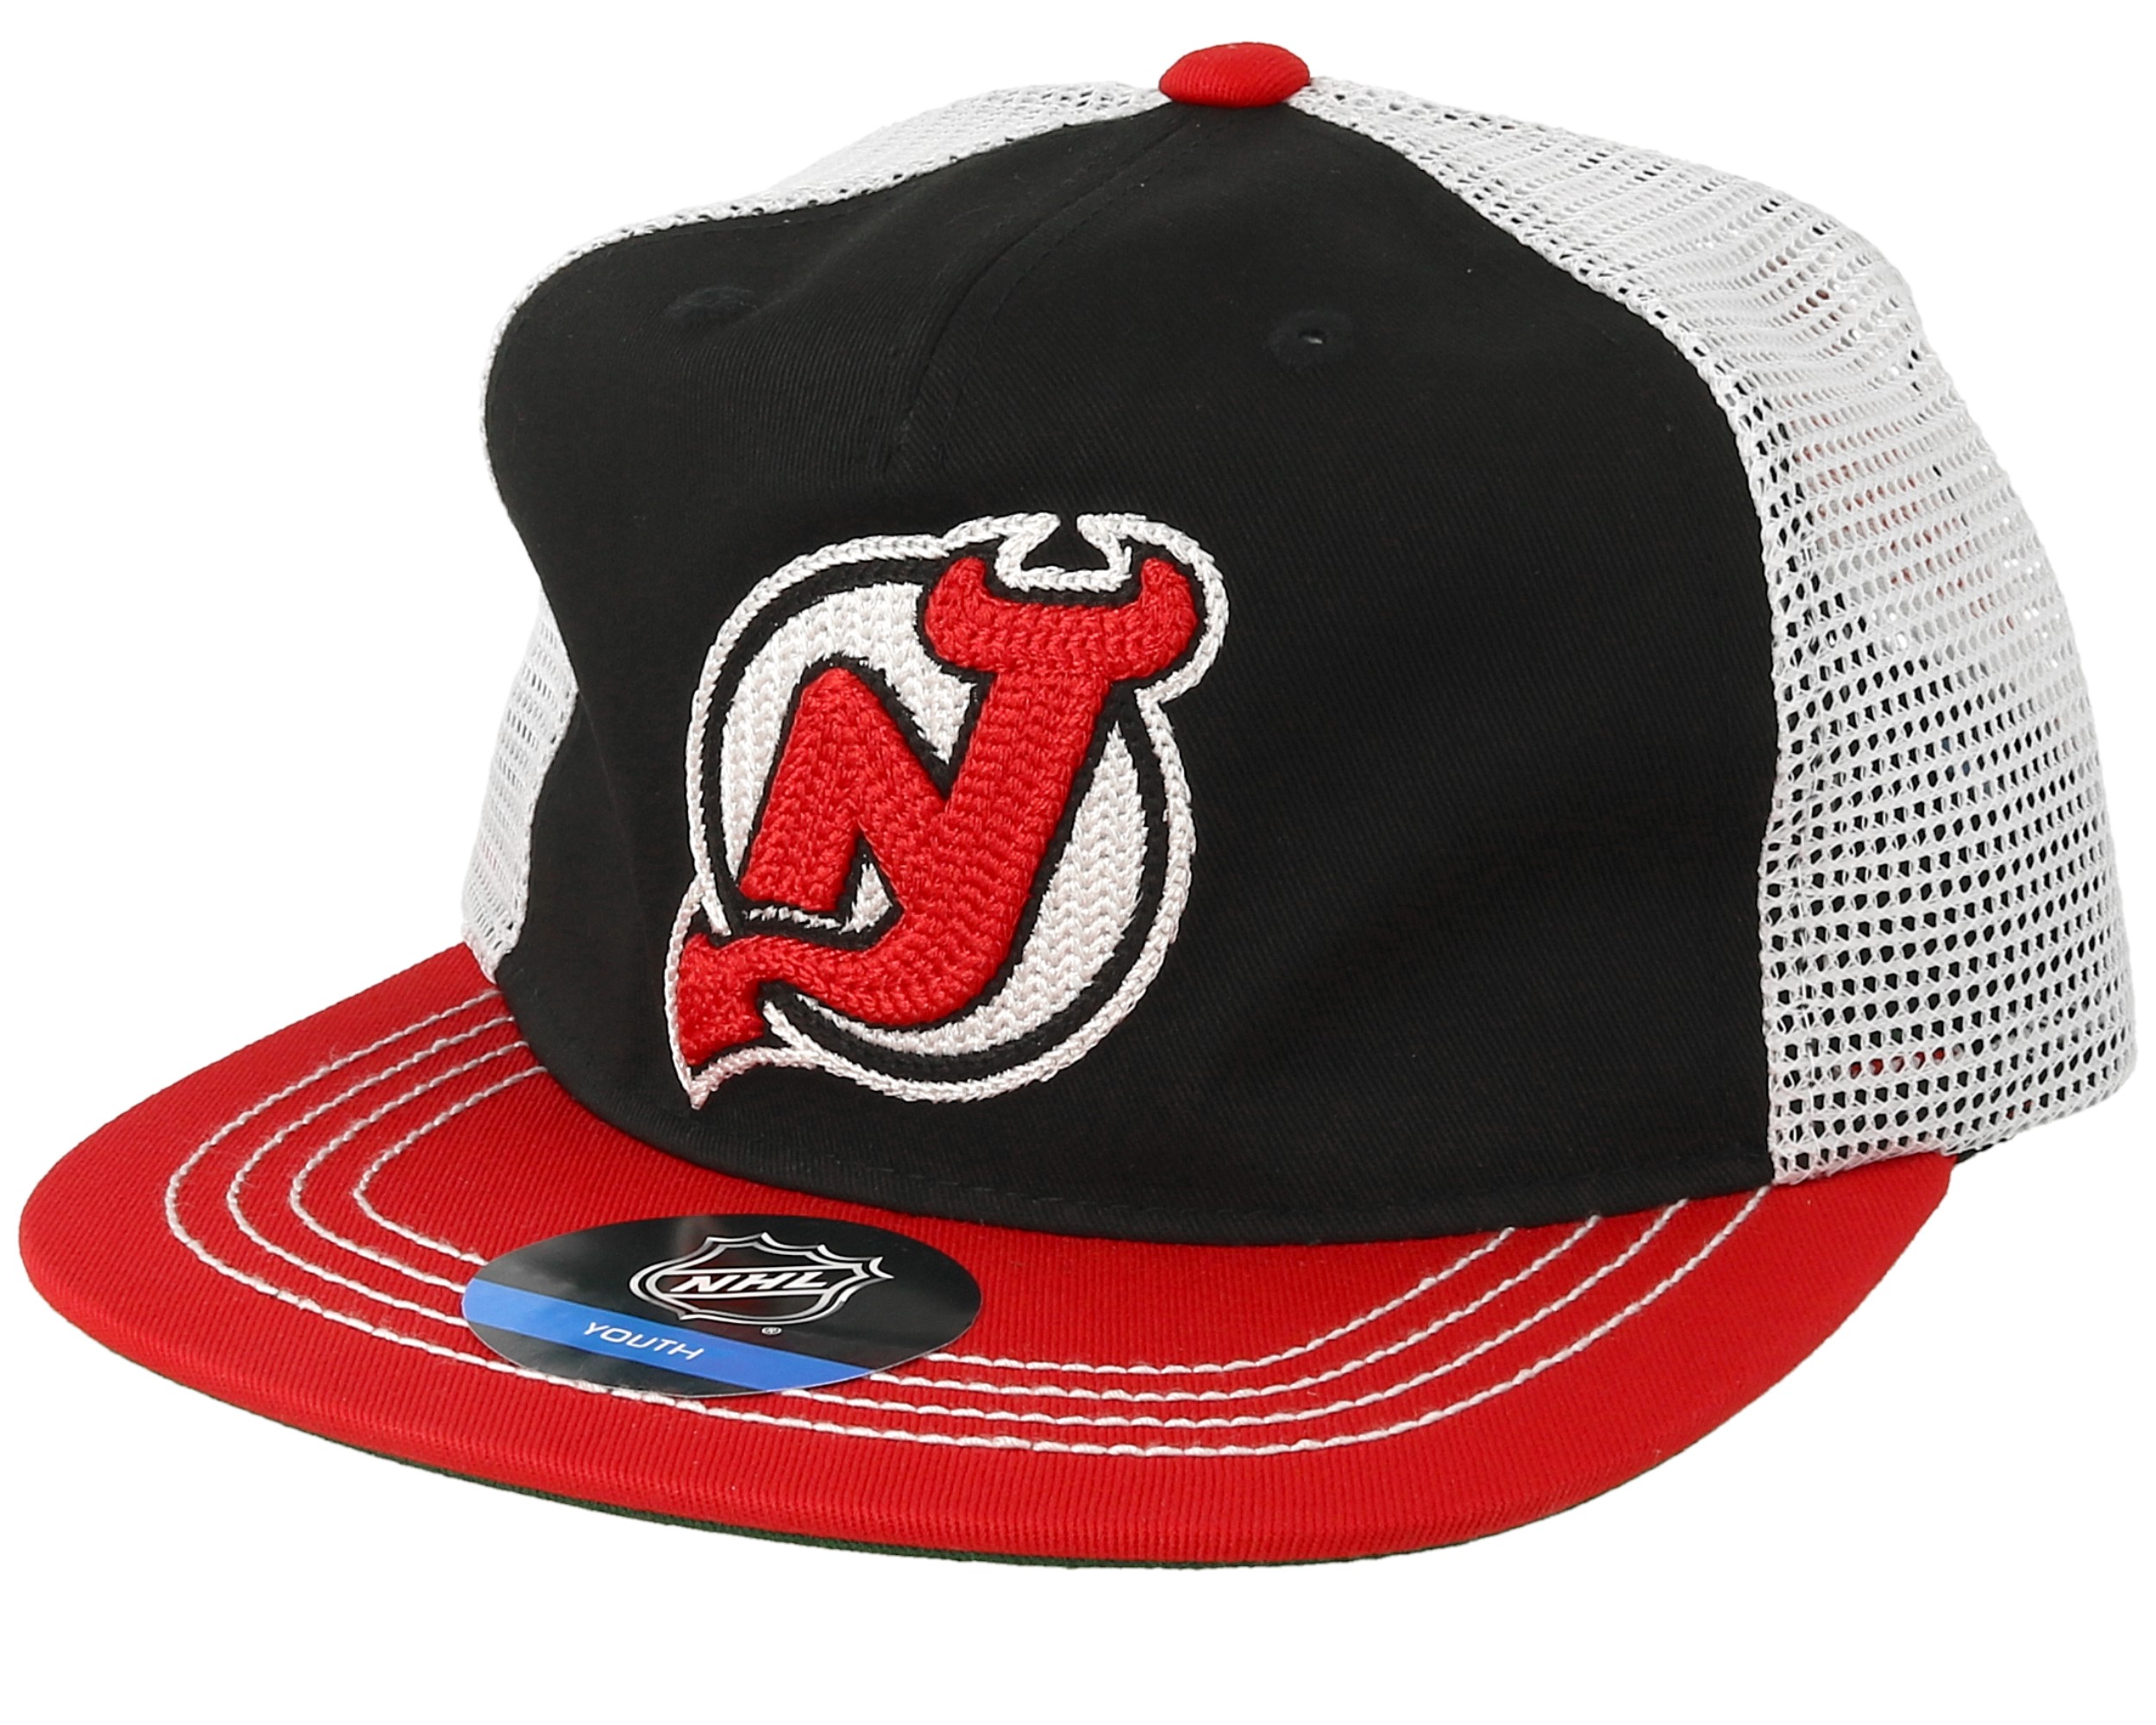 Outerstuff Cuffed Knit Hat - New Jersey Devils - Youth